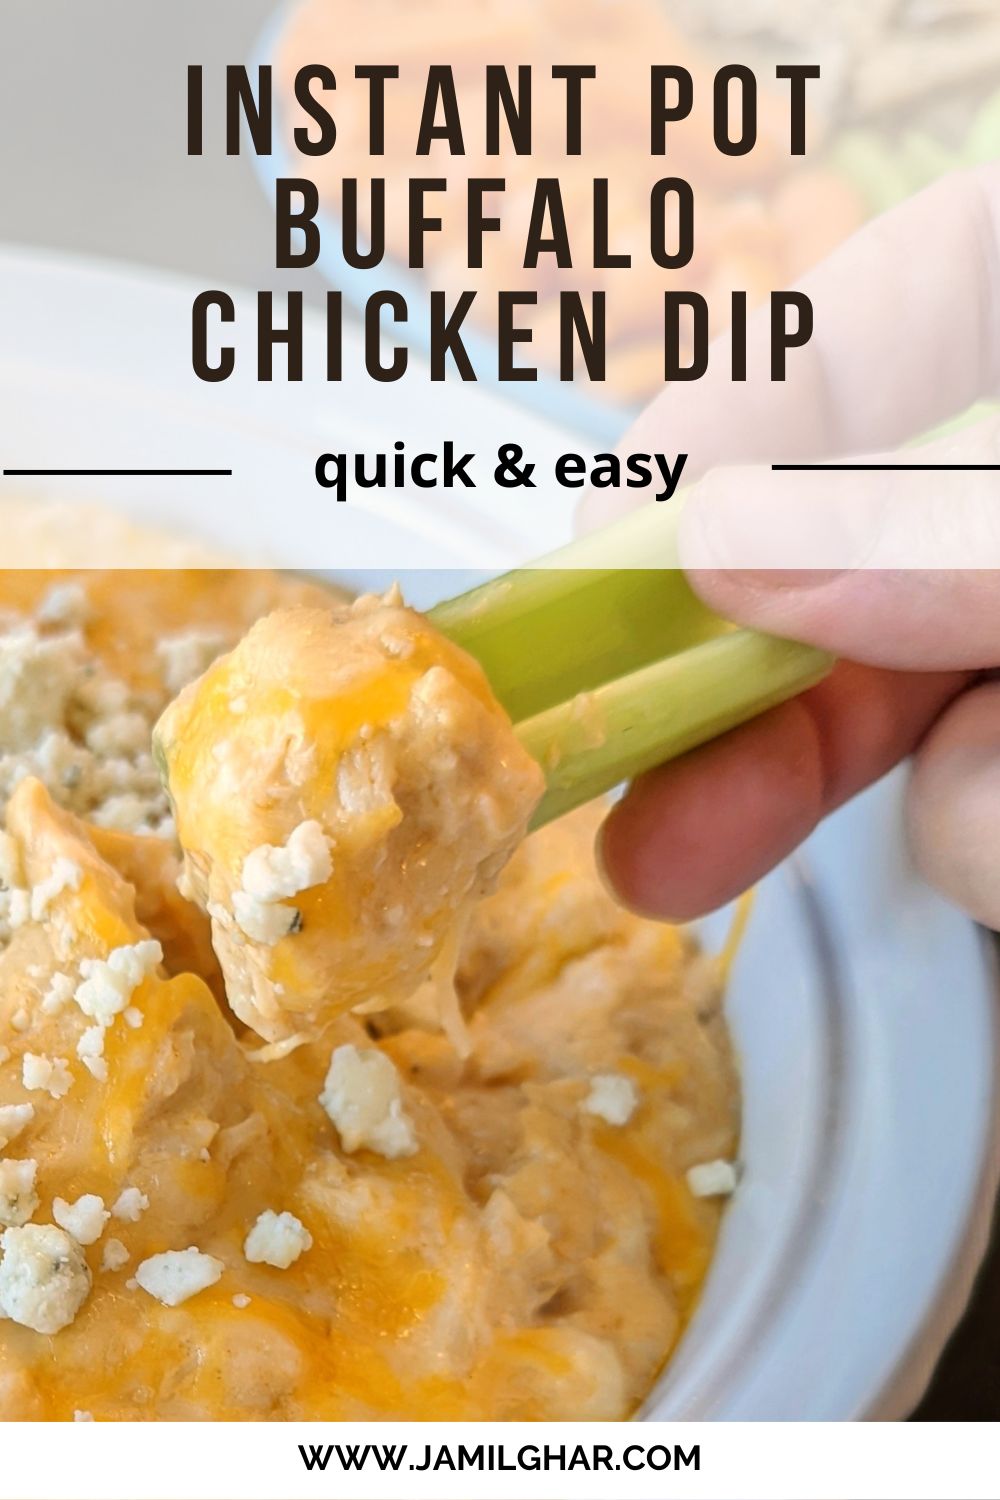 Easy Instant Pot Buffalo Chicken Dip- Ready in 5 Minutes!